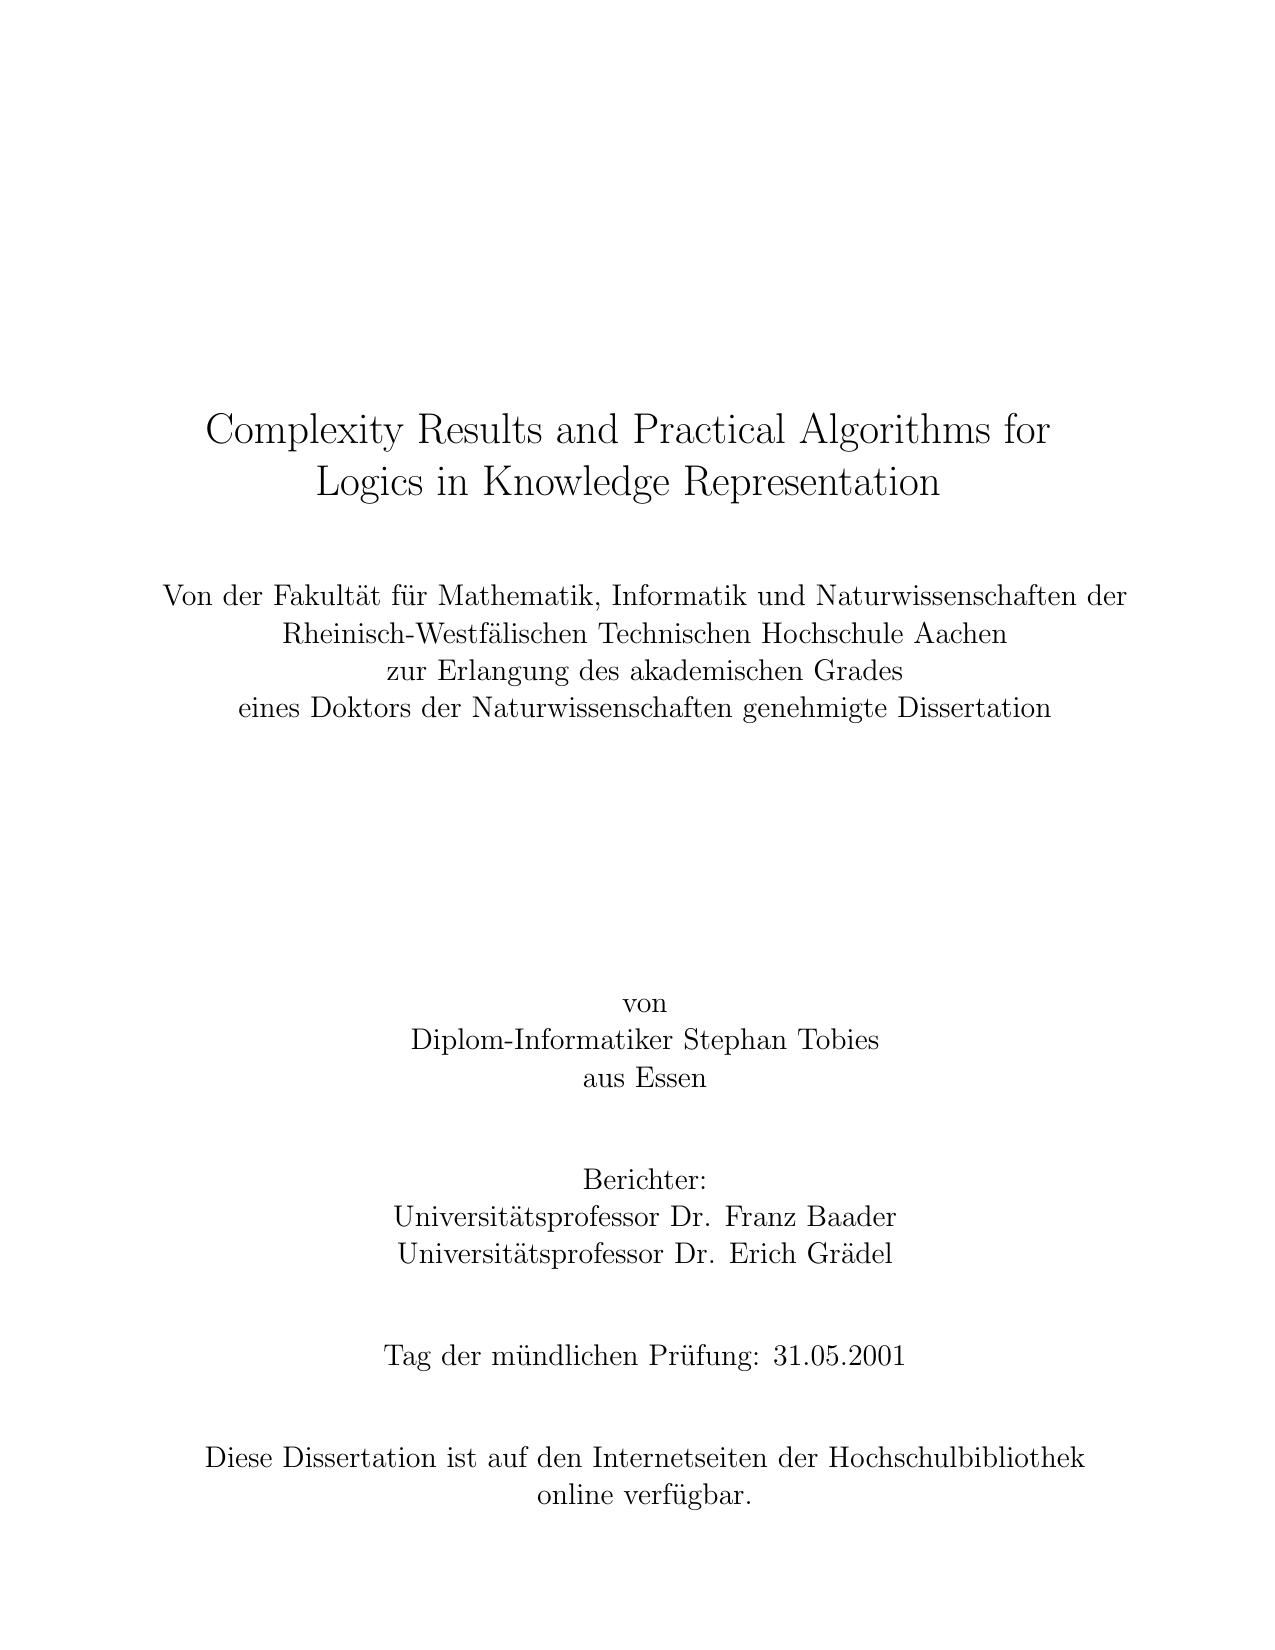 Complexity Results and Practical Algorithms for Logics in Knowledge Representation- PhD Thesis